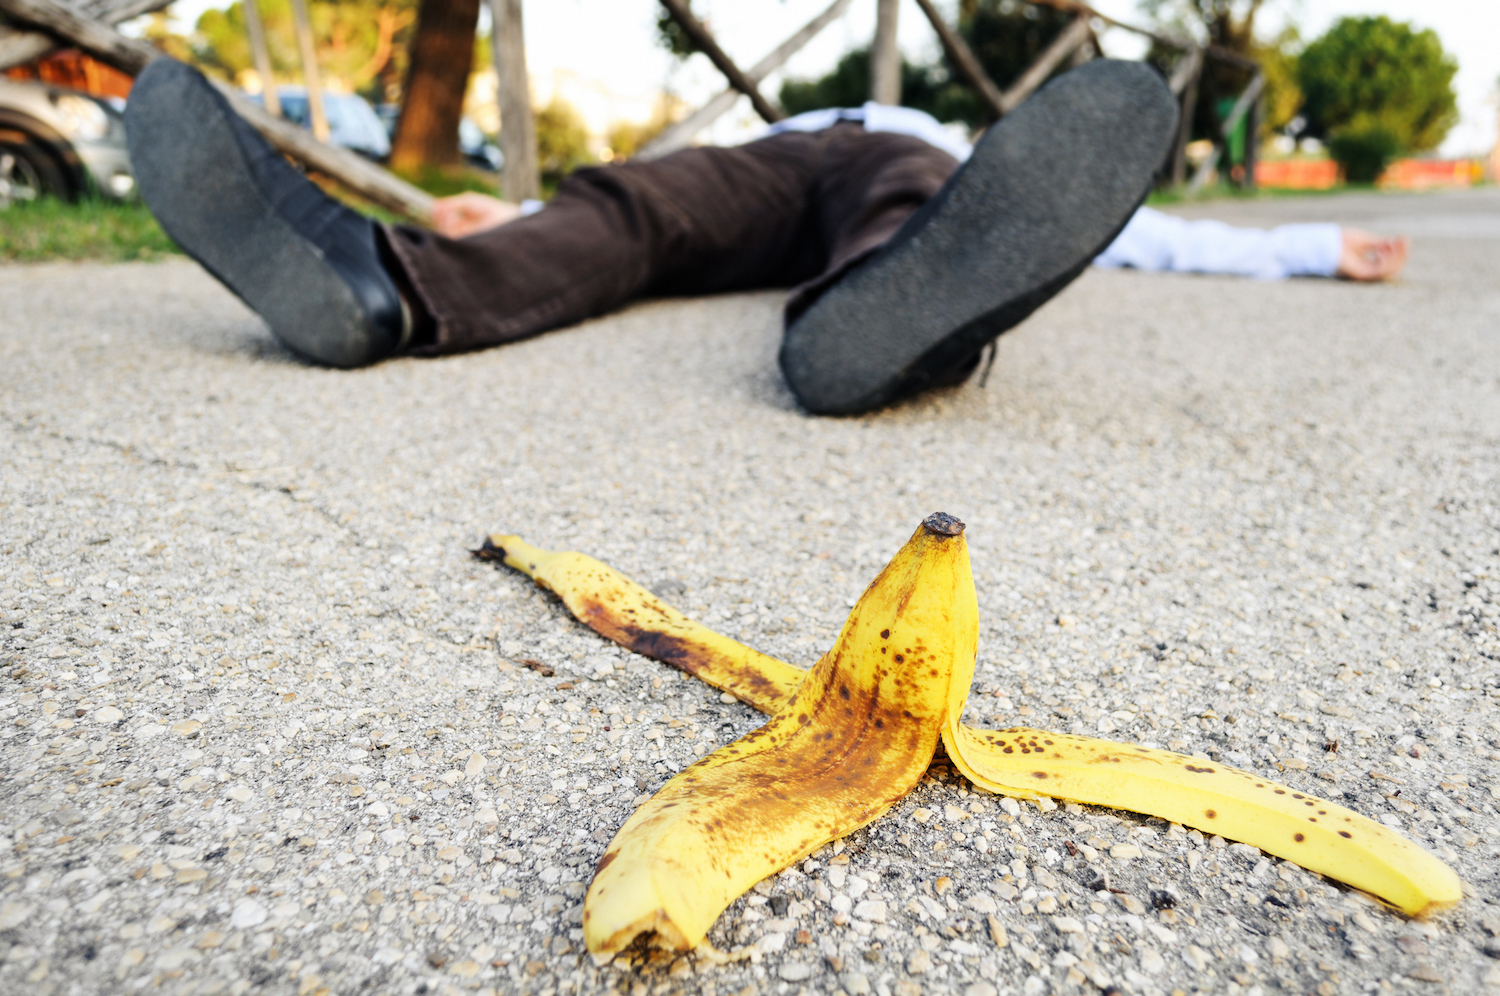 Man fell to the ground on a banana peel.